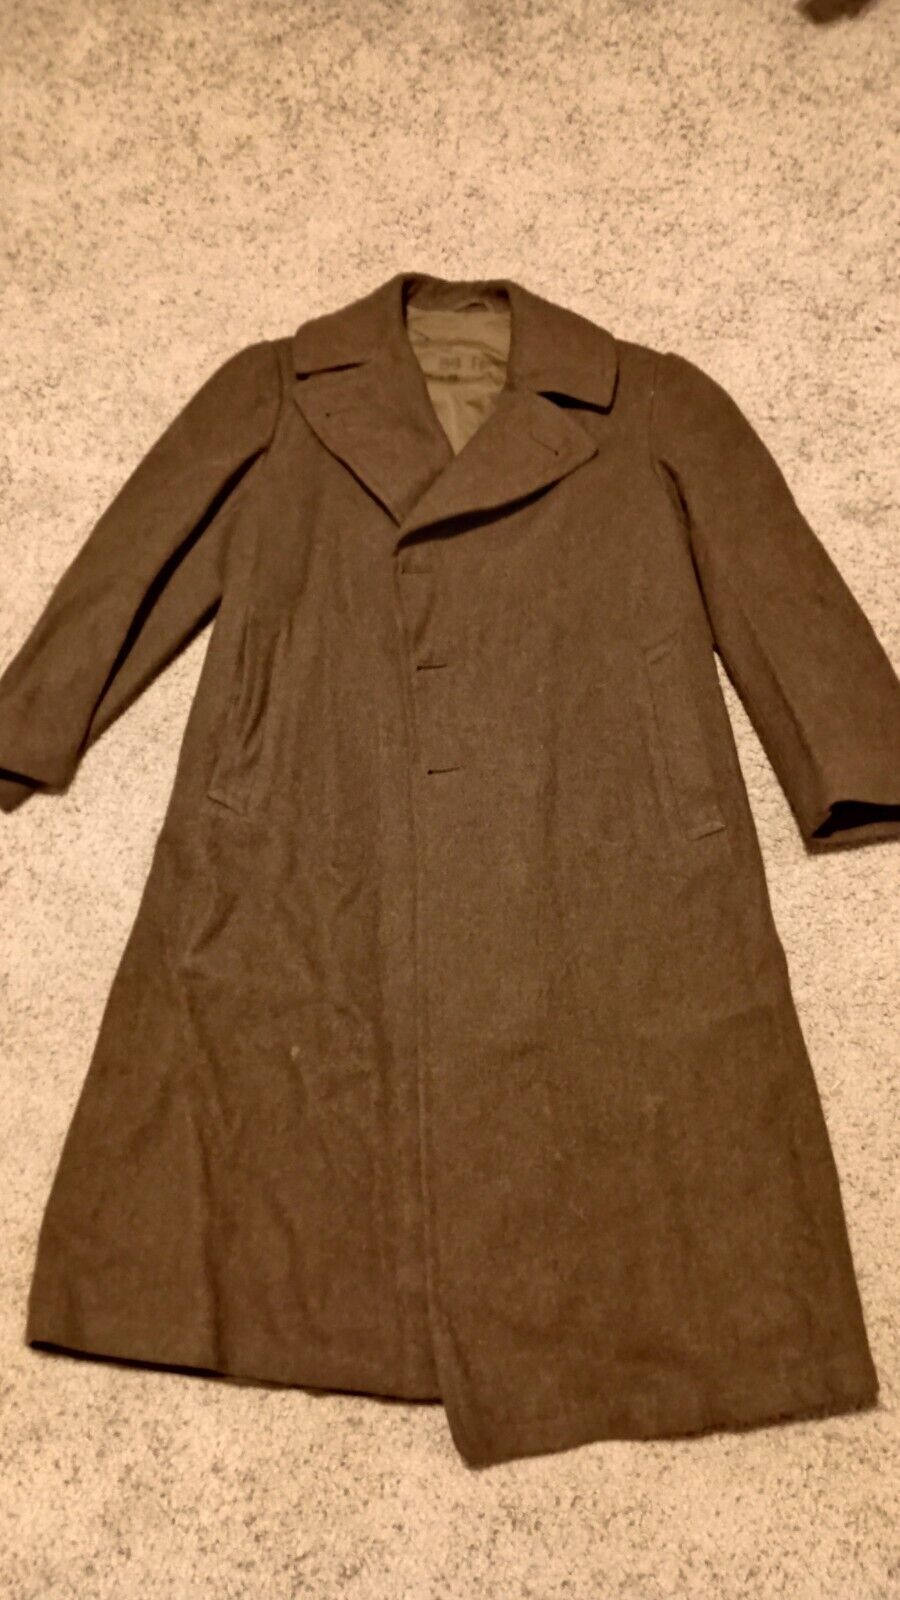 WW2 WWII 1940 Vintage US Army Trench Coat Overcoat, Melton Wool, 36R Modified